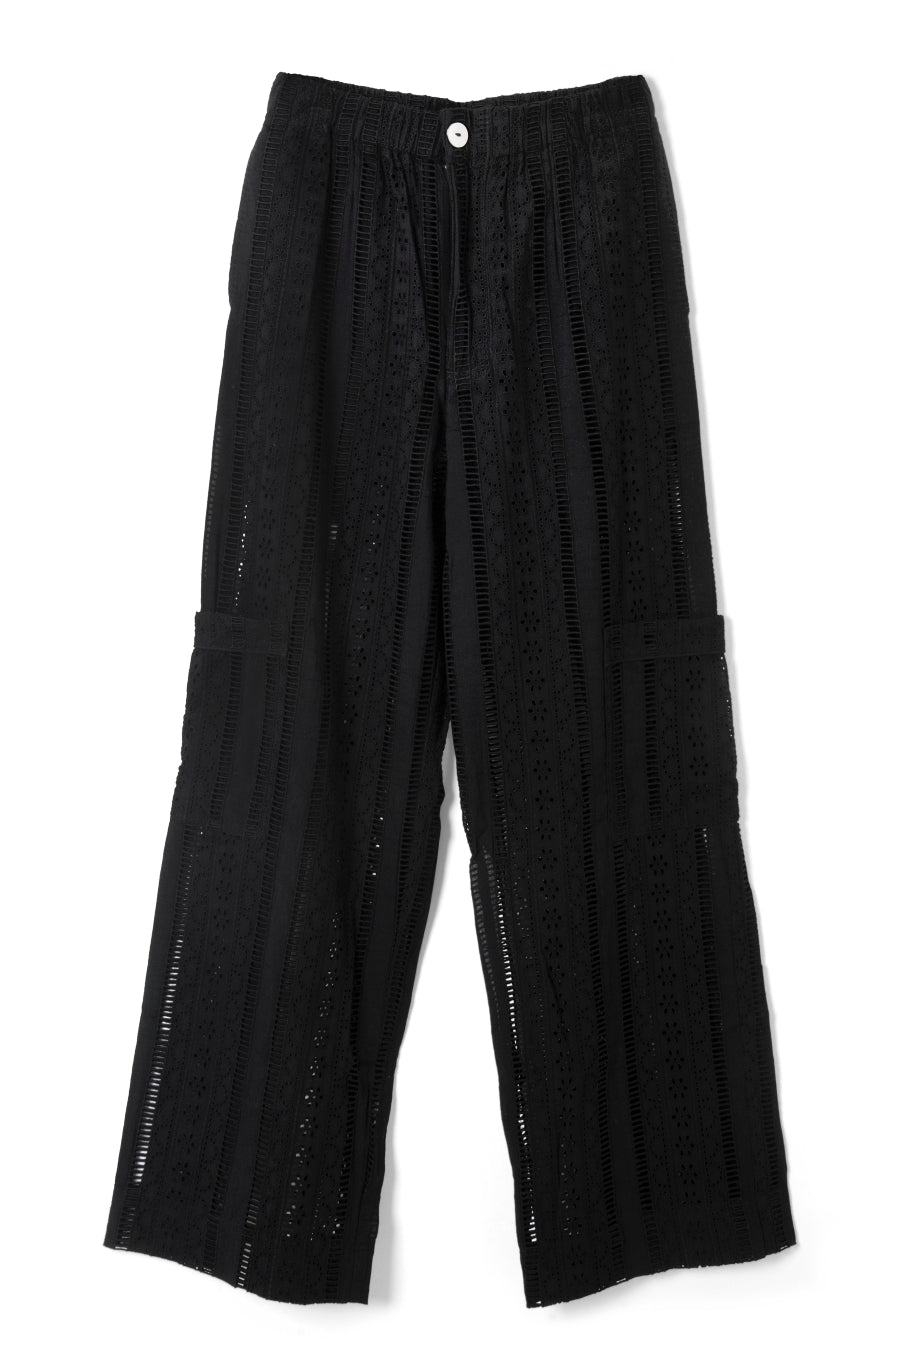 vacation pants - black broderie